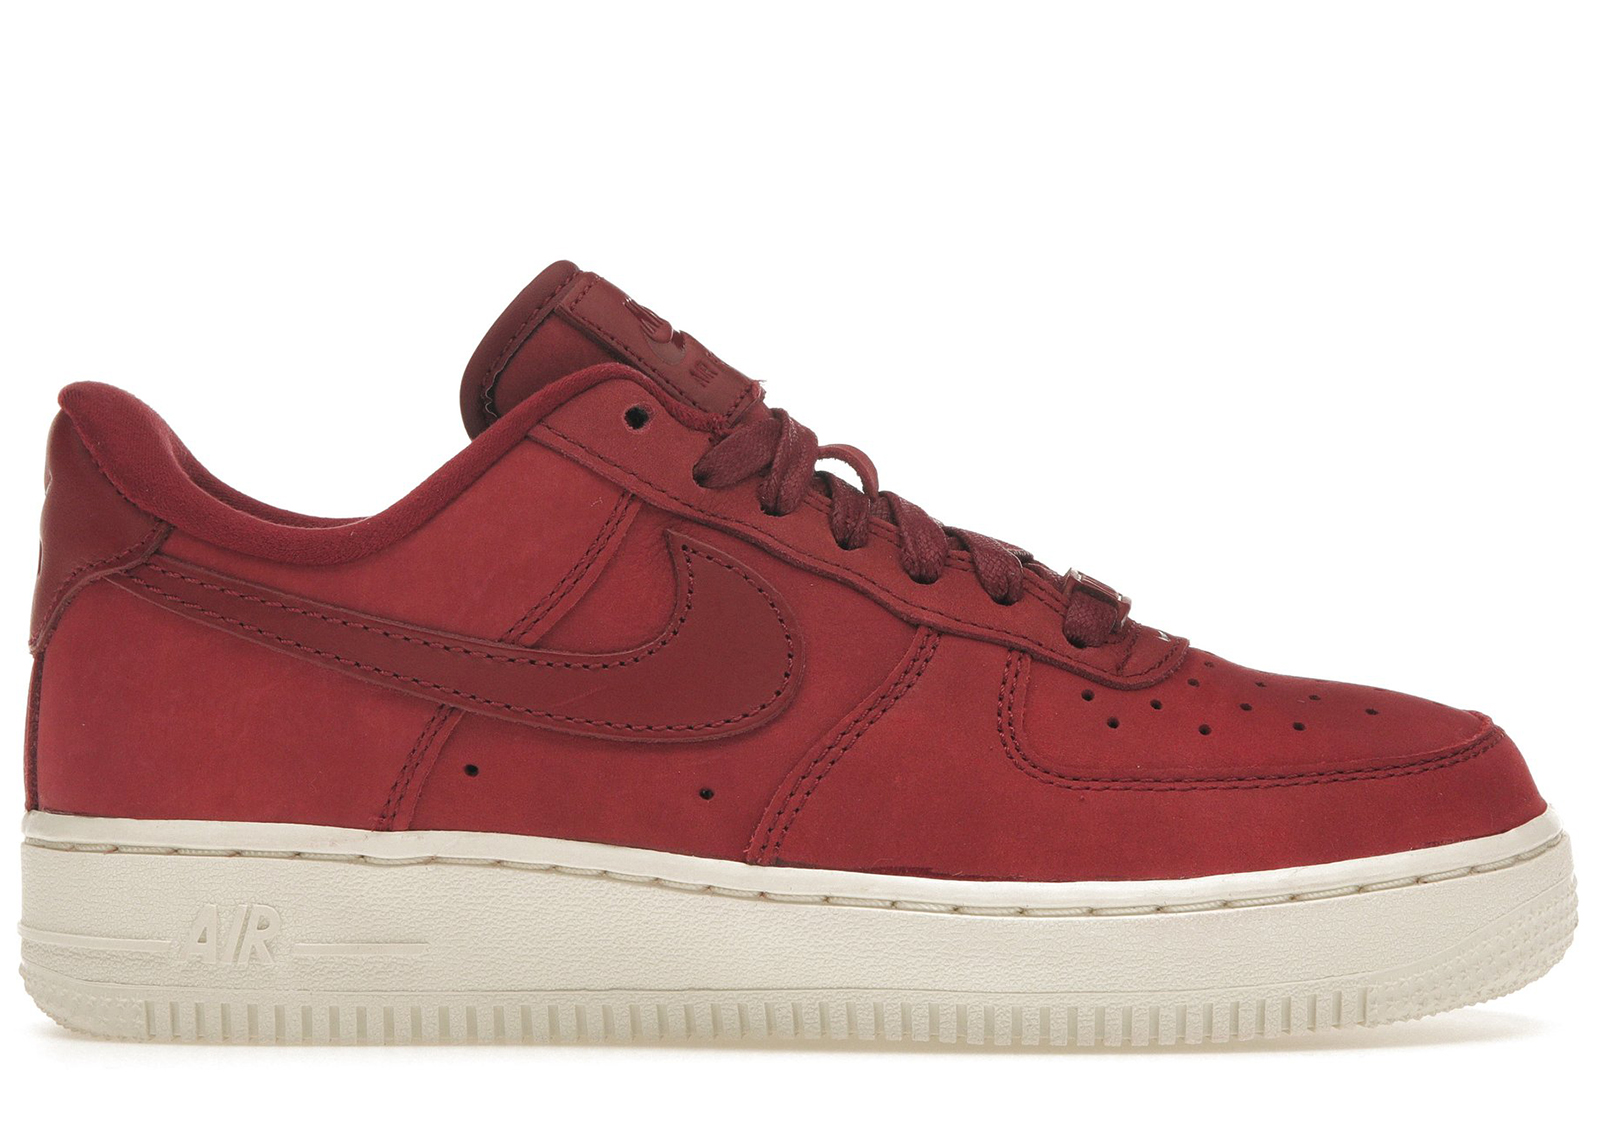 Nike Air Force 1 Low '07 PRM Team Red Sail (Women's)